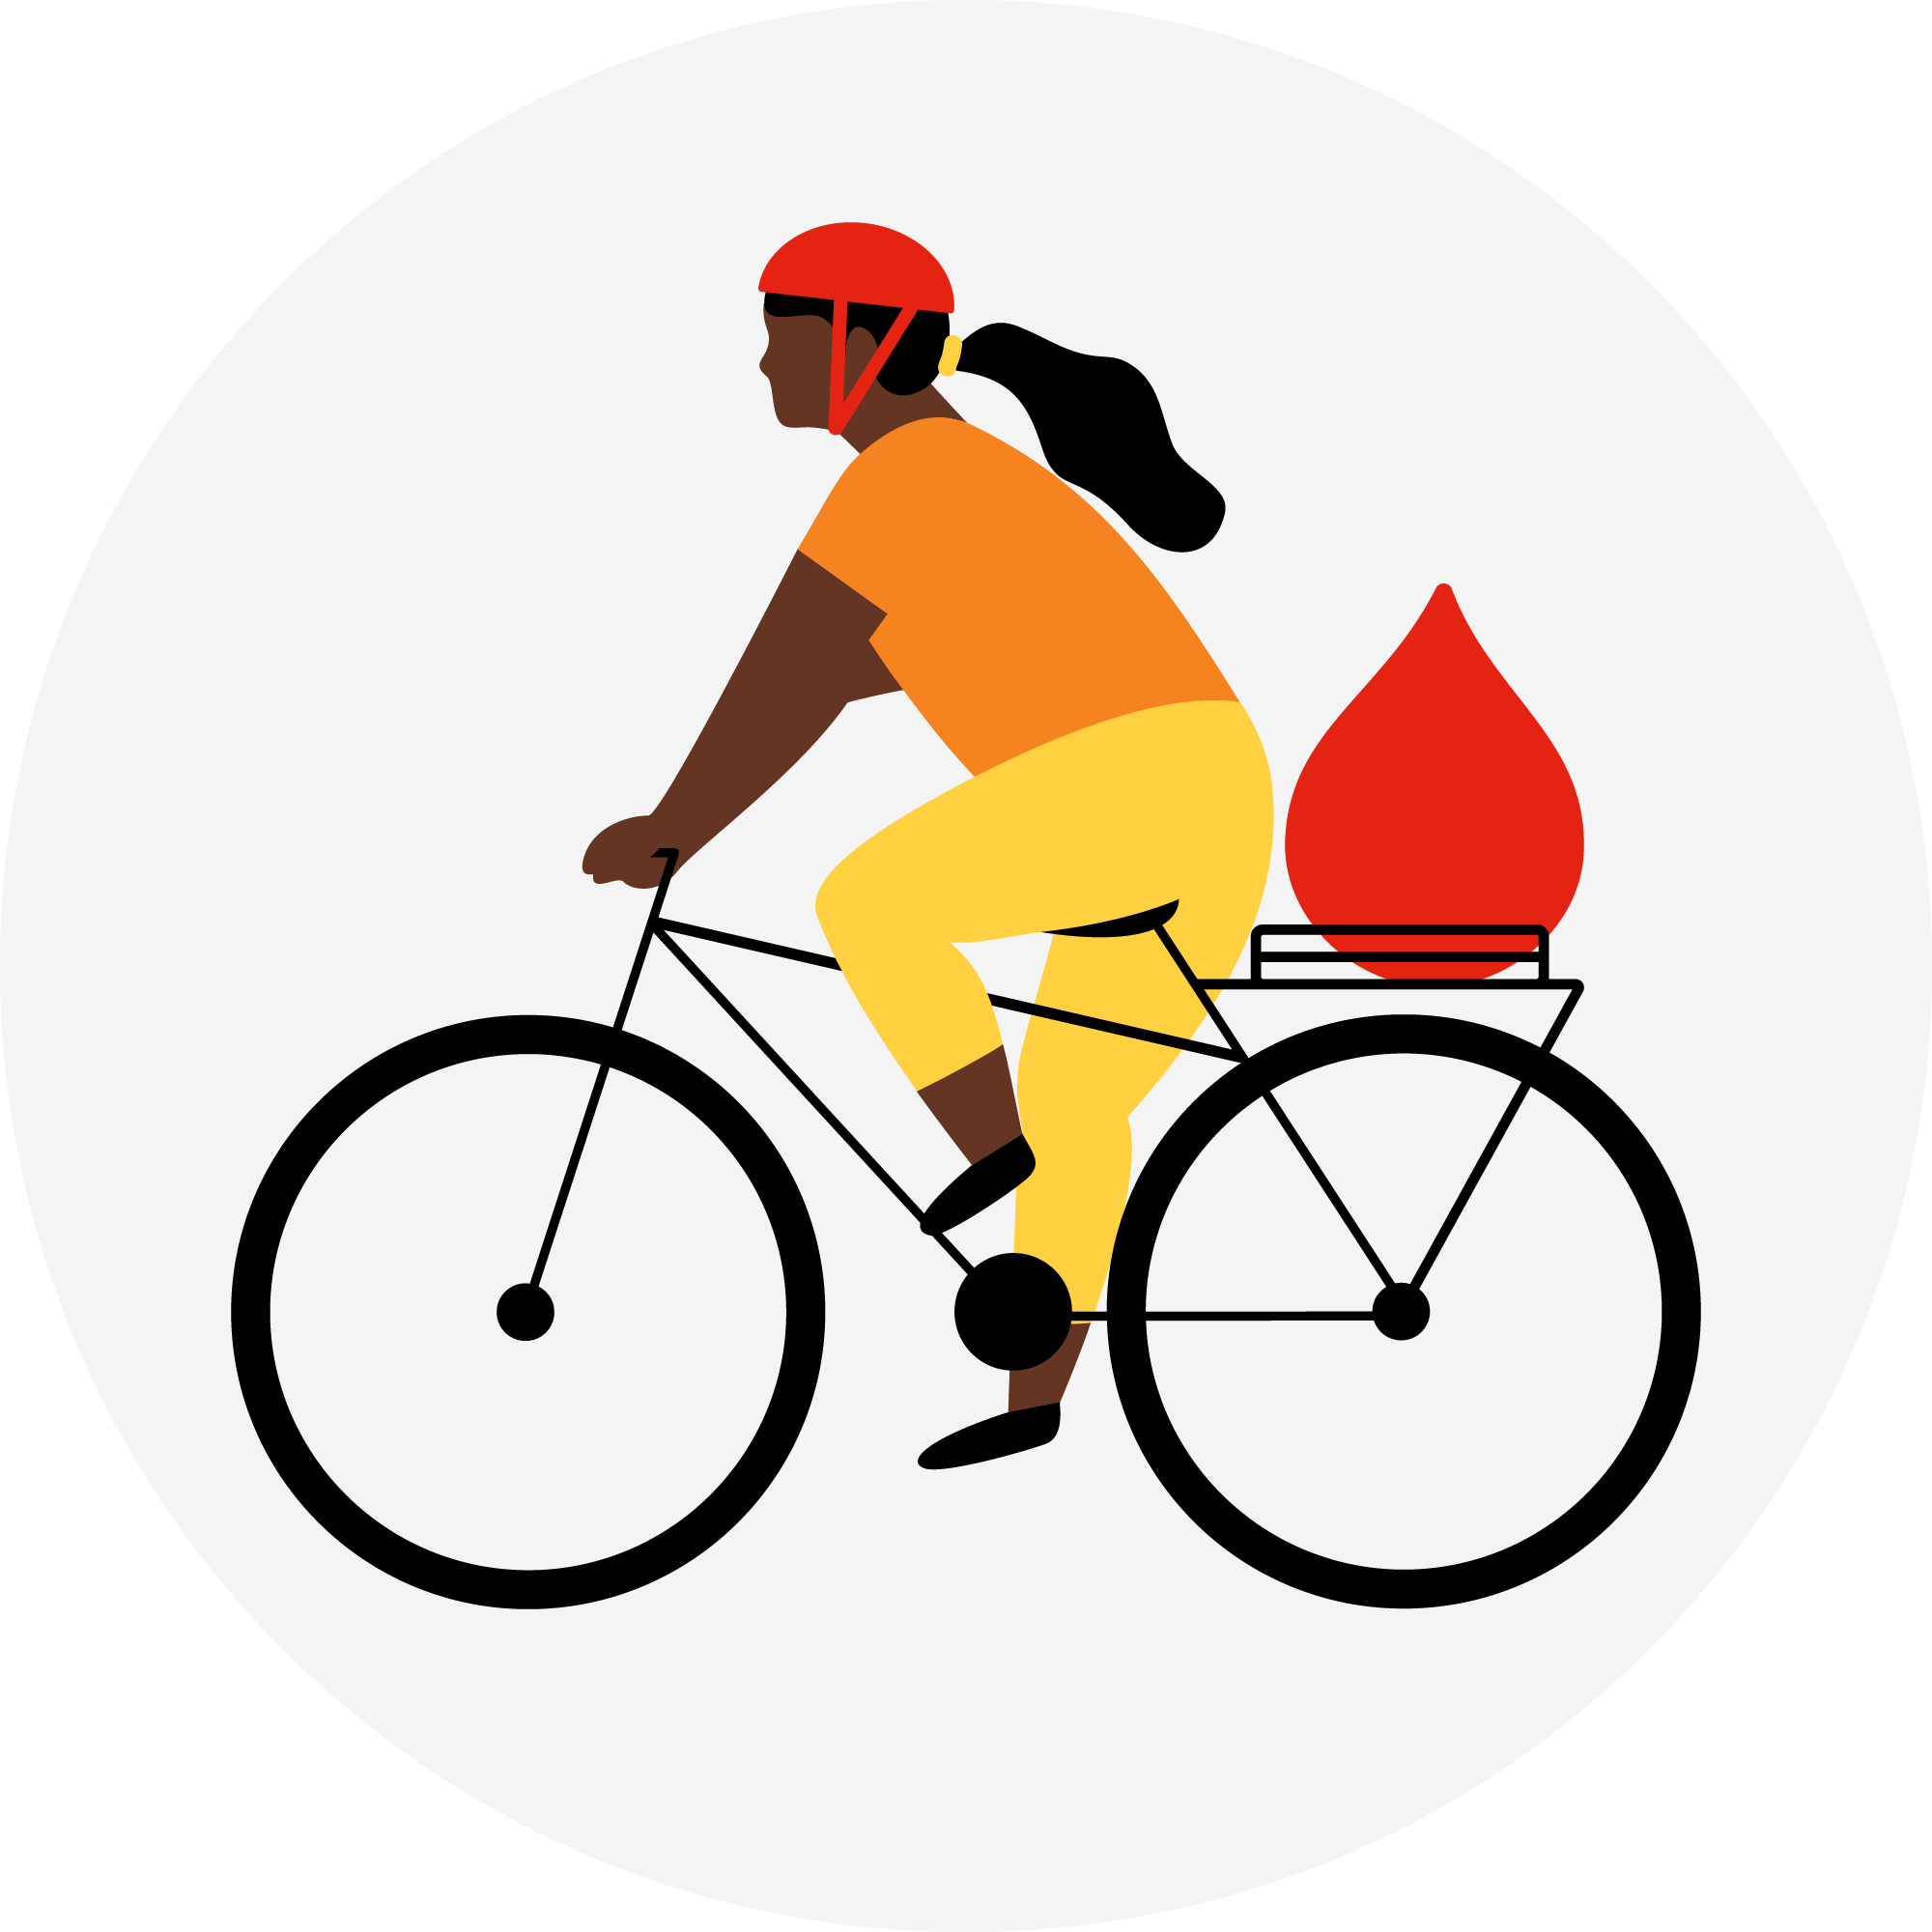 illustration of a person riding a bicycle, on the back of the bike is a red blood droplet